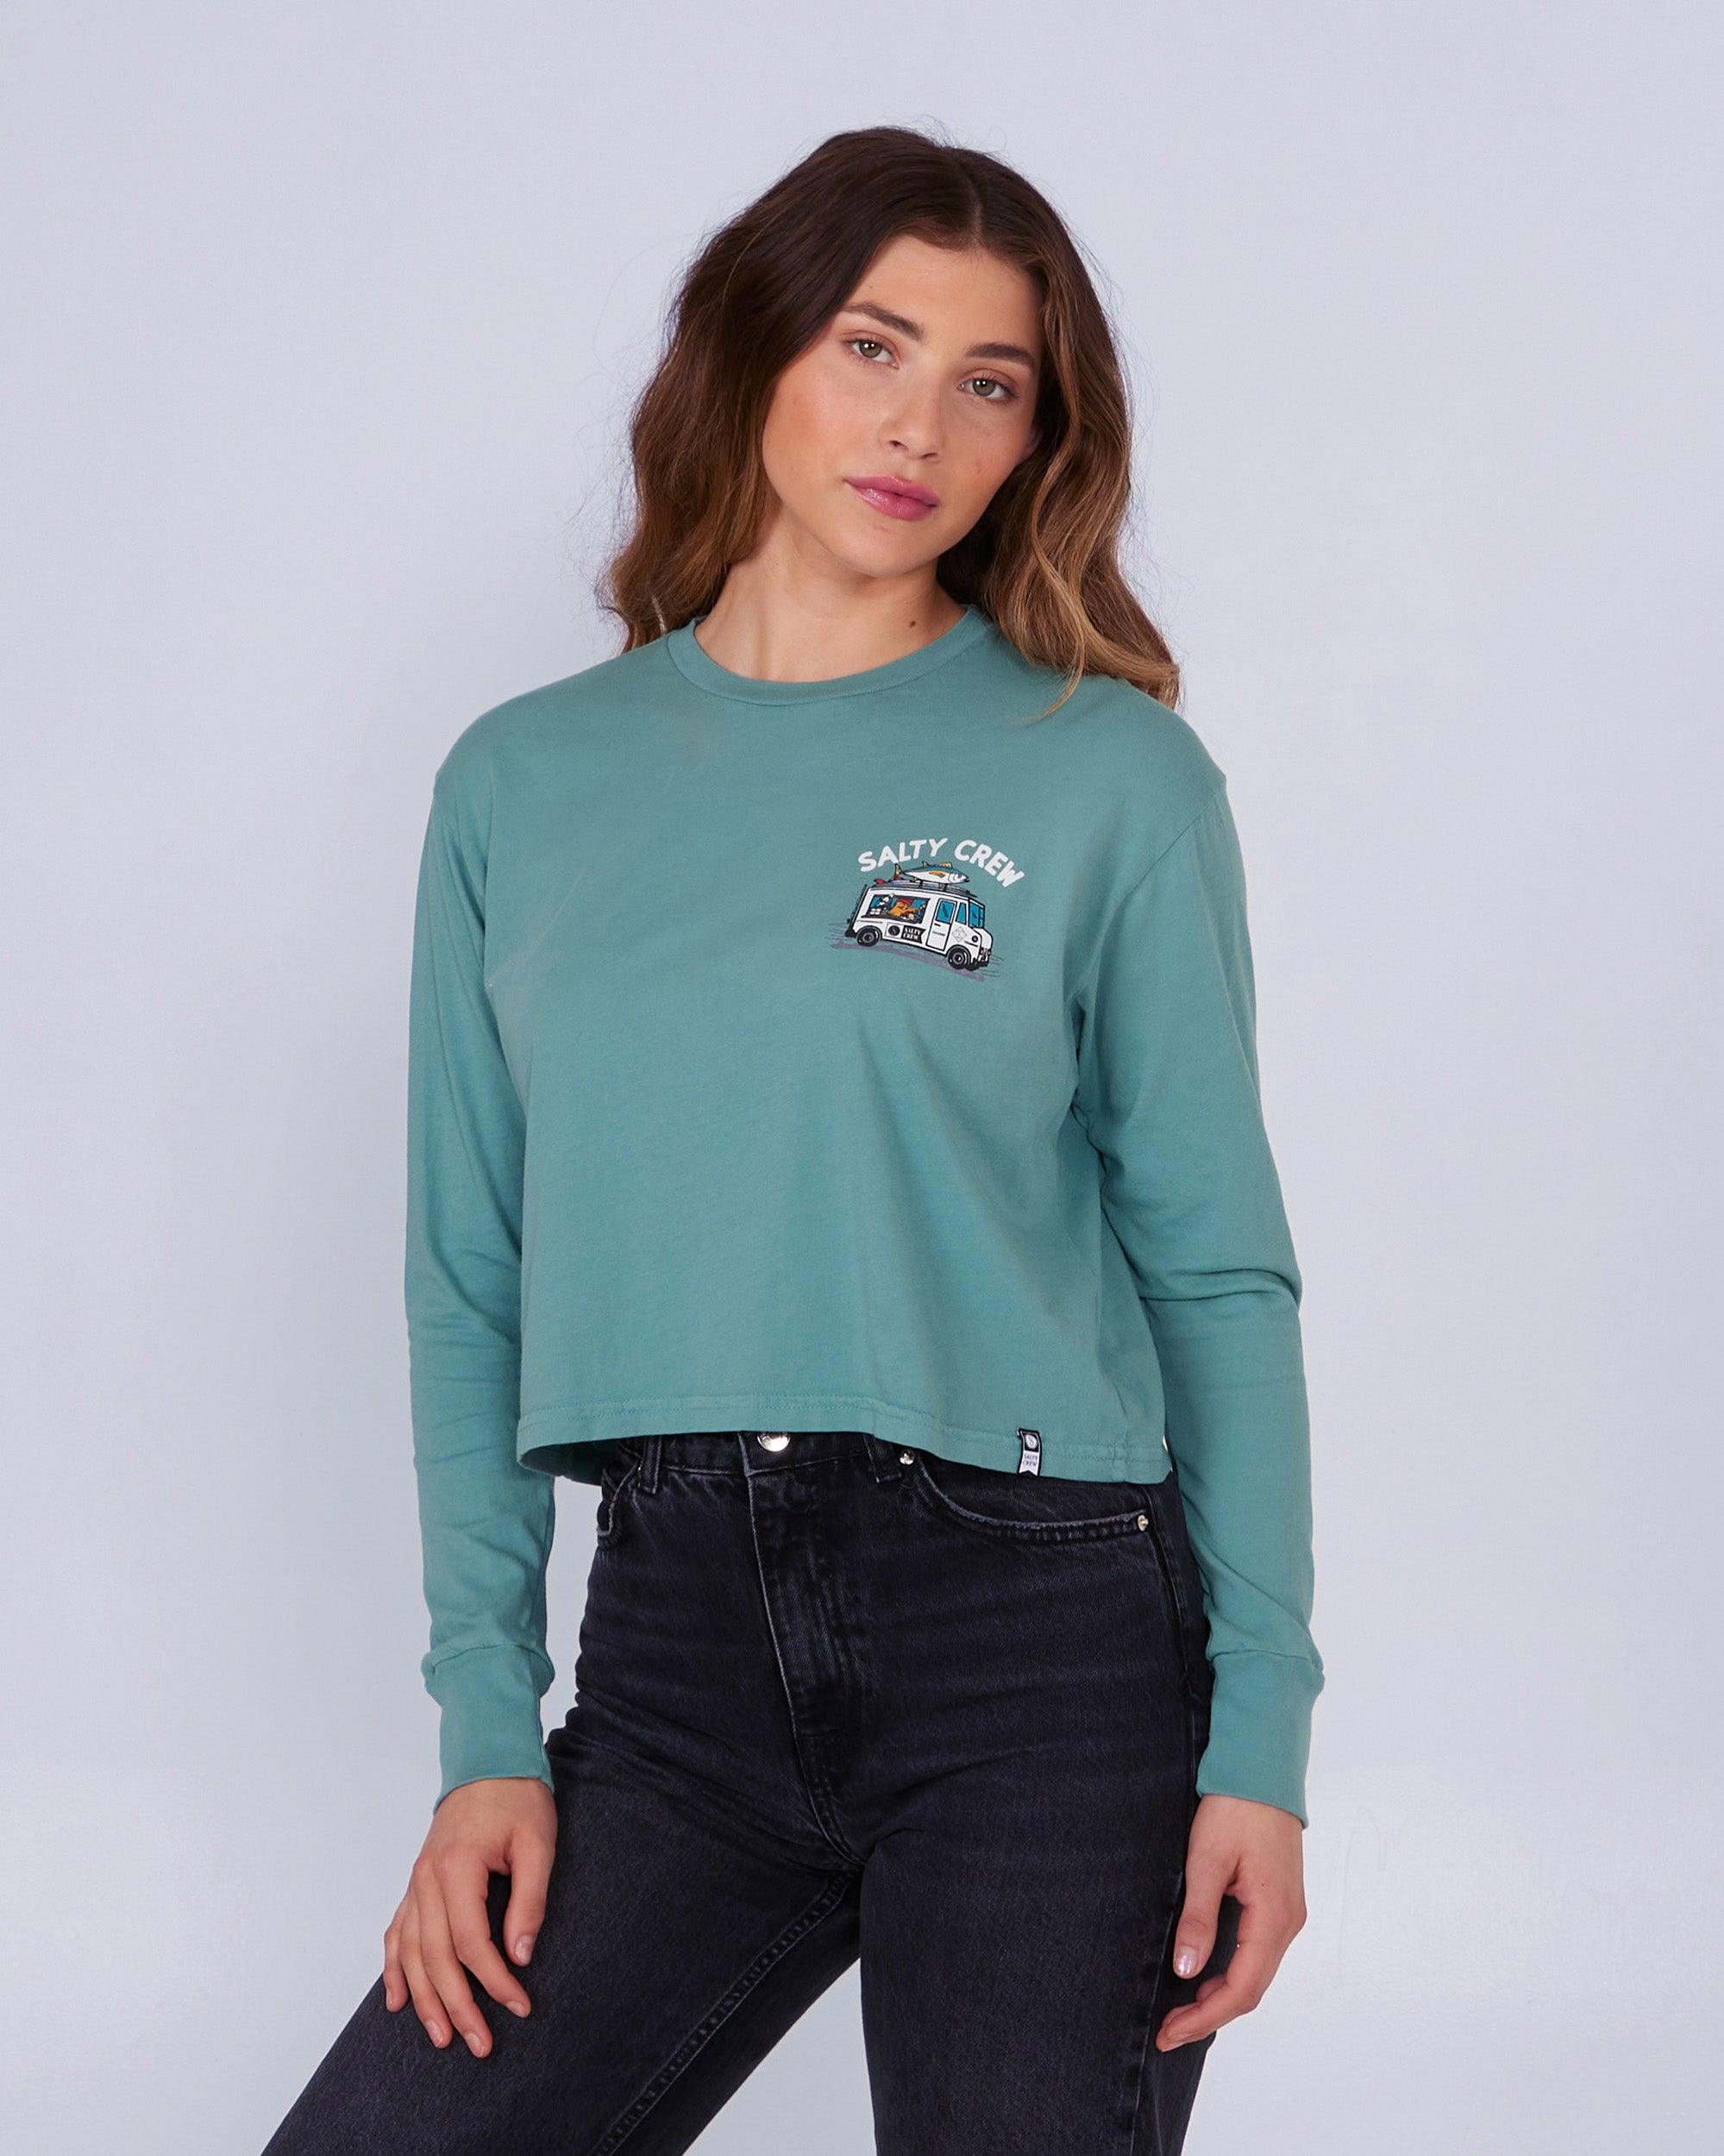 Reels and Meals L/S Crop Tee - Dusty Turq - Purpose-Built / Home of the Trades